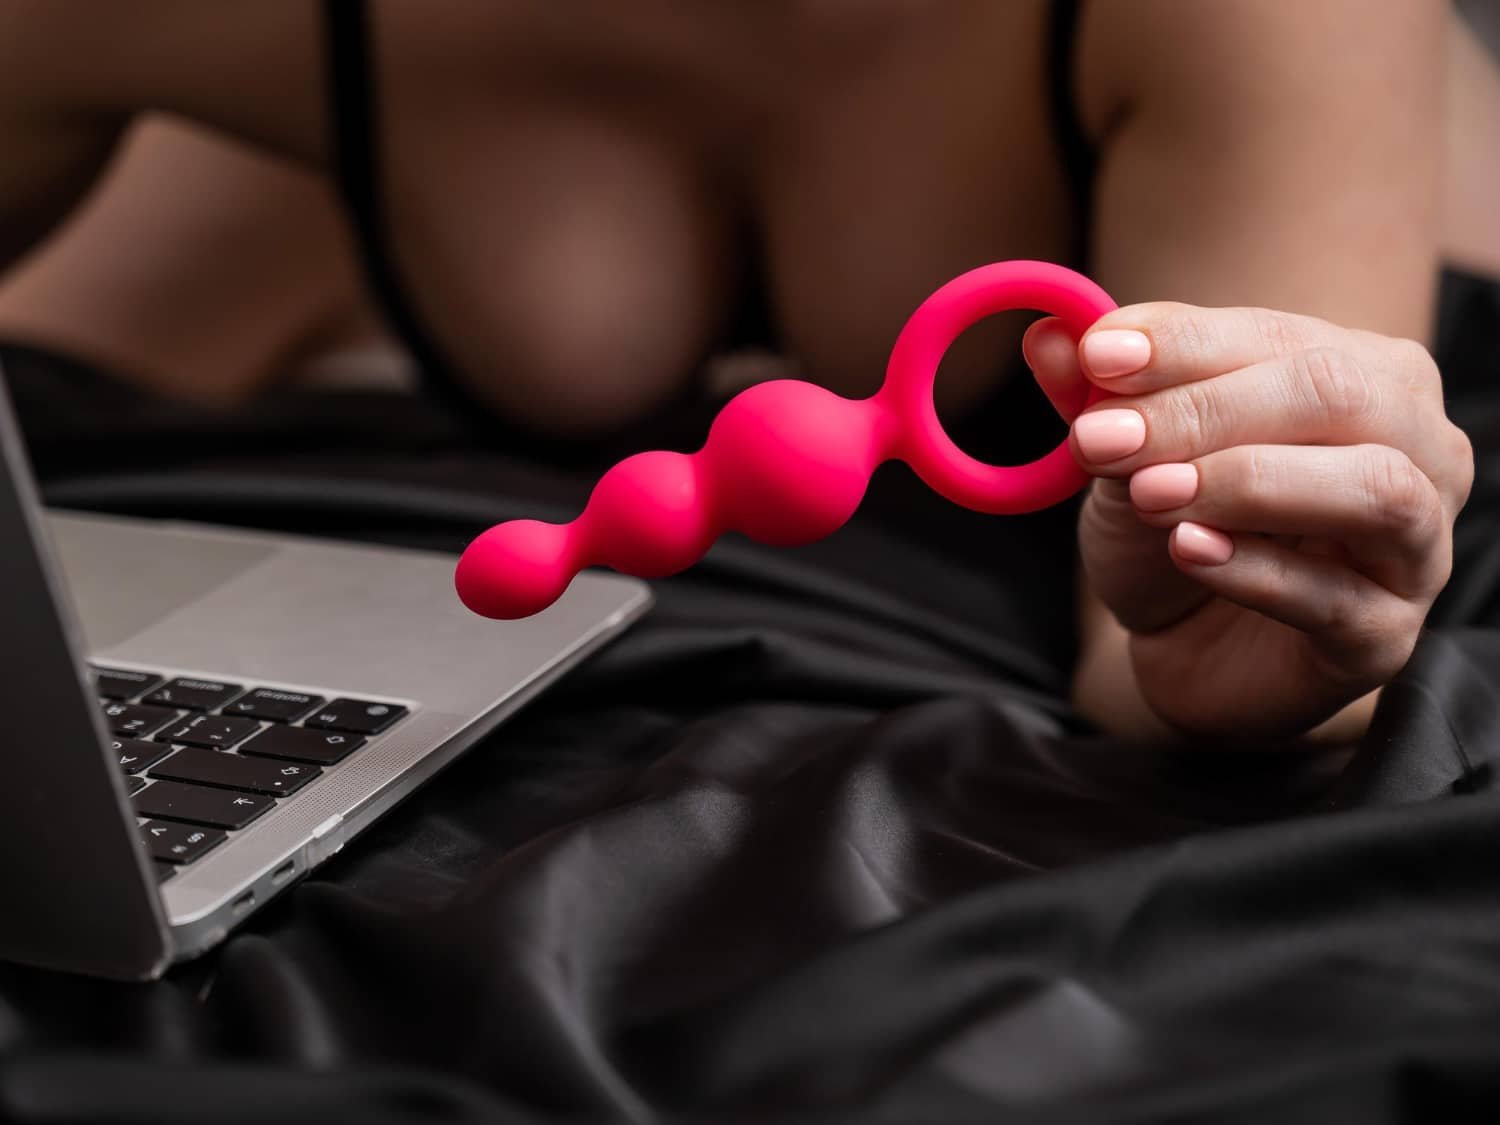 Enhance Your Pleasure With Tantus’s High-Quality Silicone Adult Toys